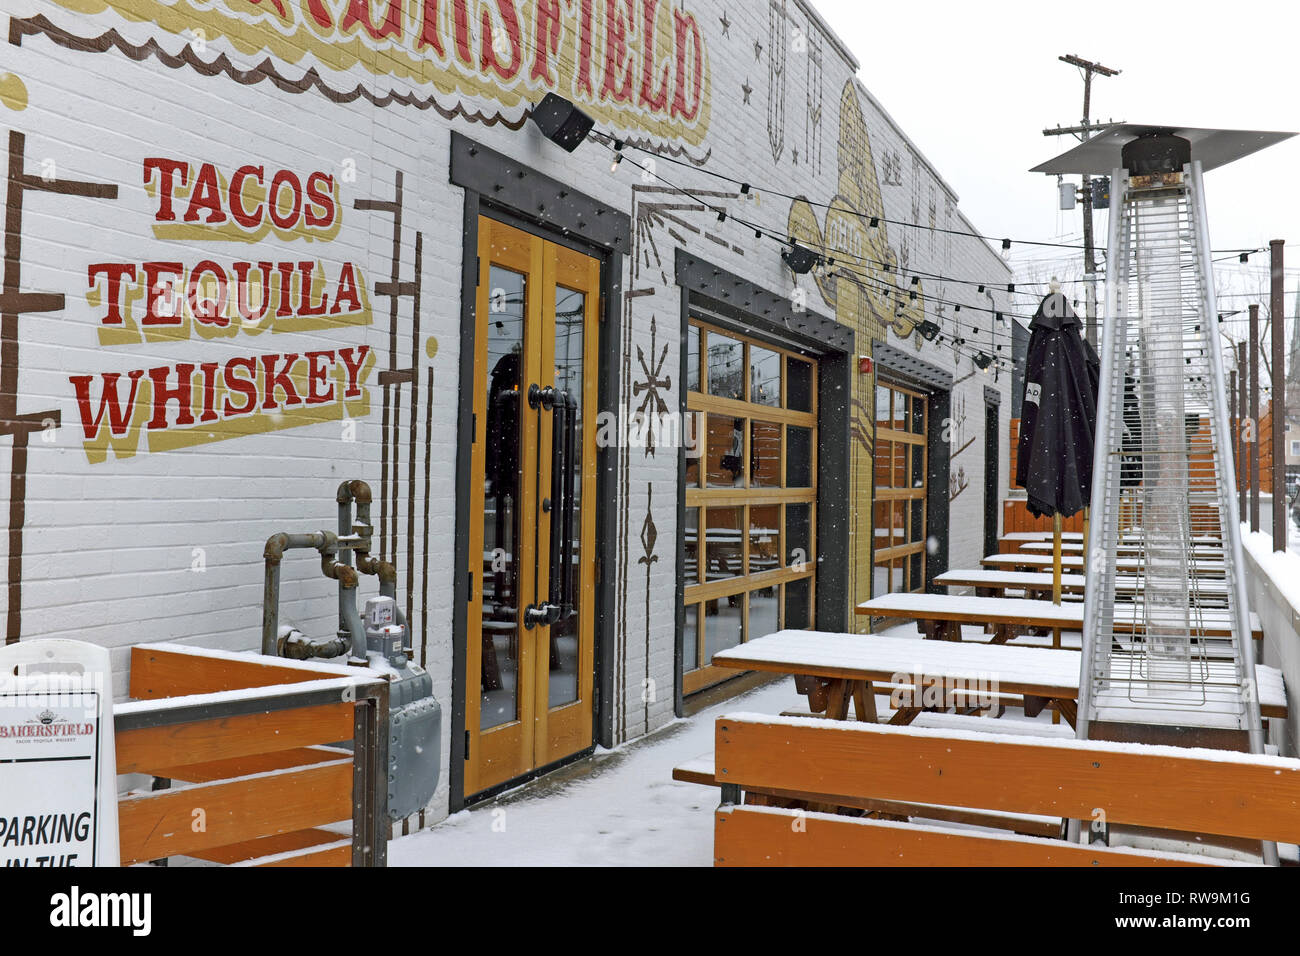 Bakersfield Restaurant, one of many restaurants on trendy West 25th Street in Ohio City near downtown Cleveland, Ohio, during the wintertime. Stock Photo